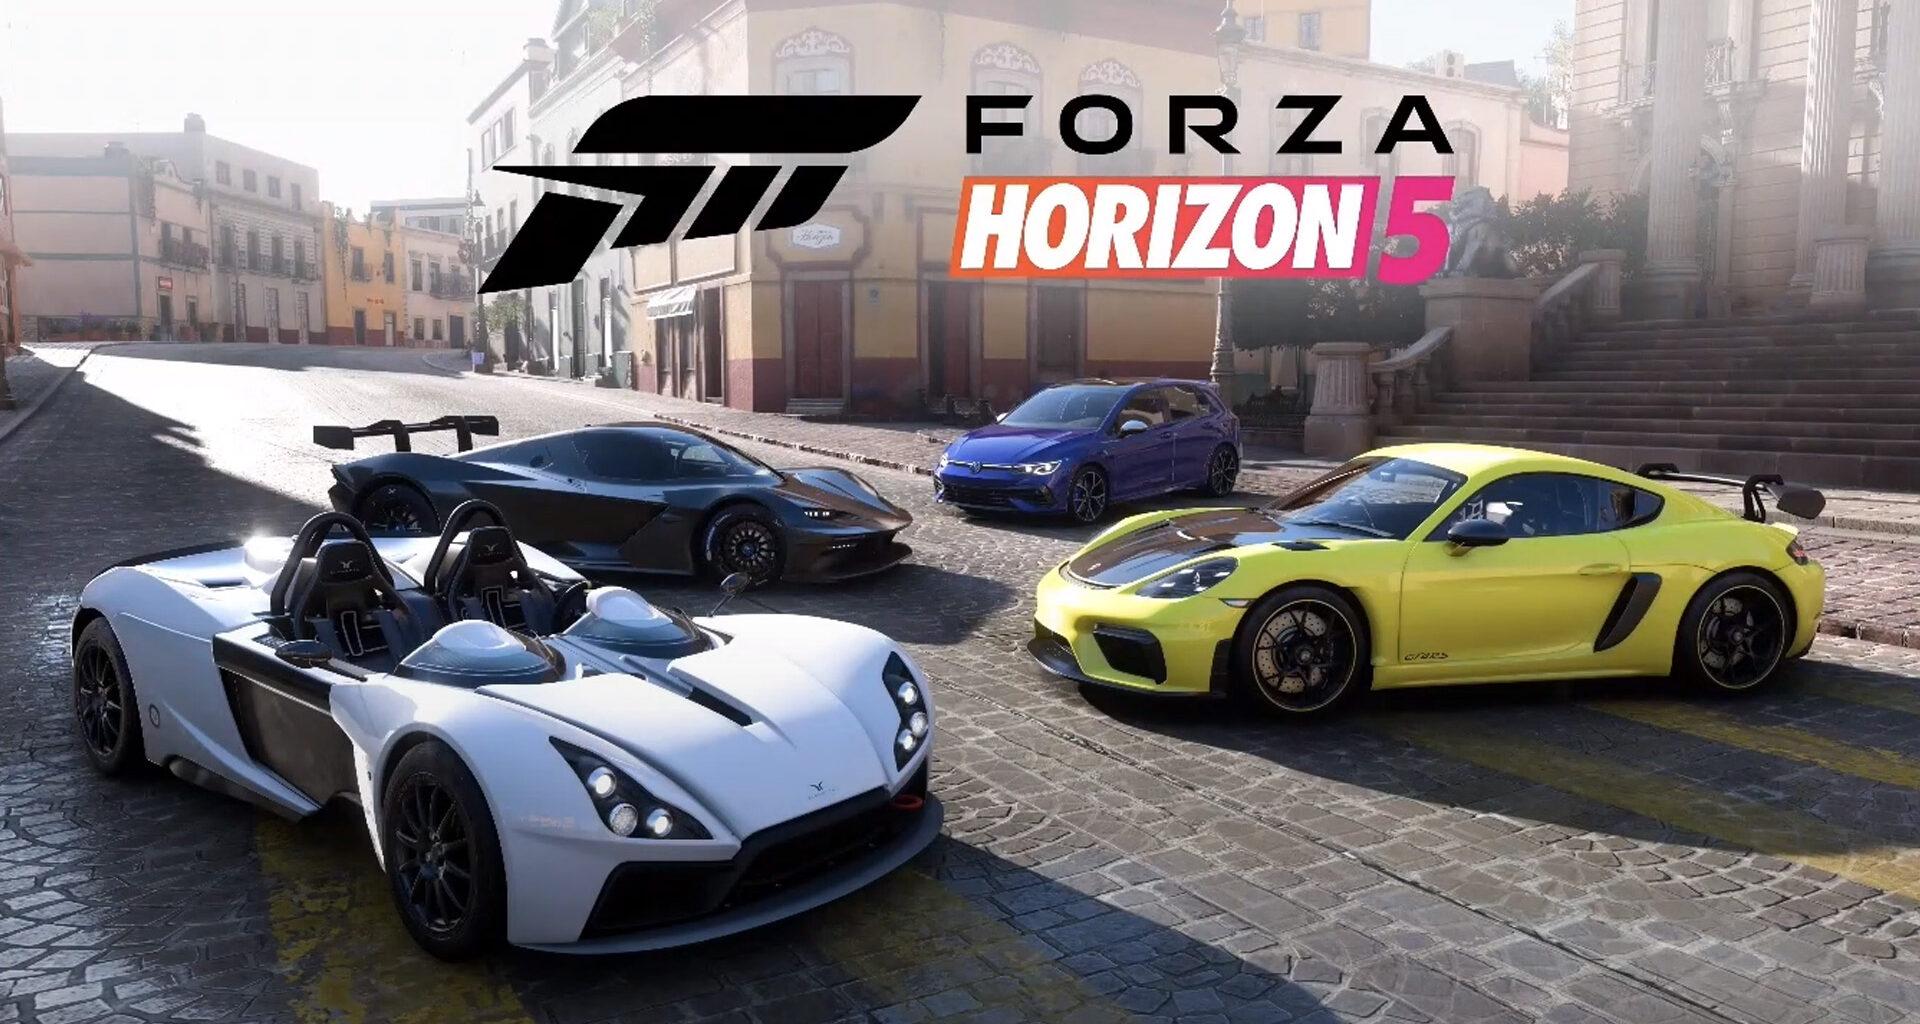 Four new Forza Horizon 5 cars in Super Speed Car Park